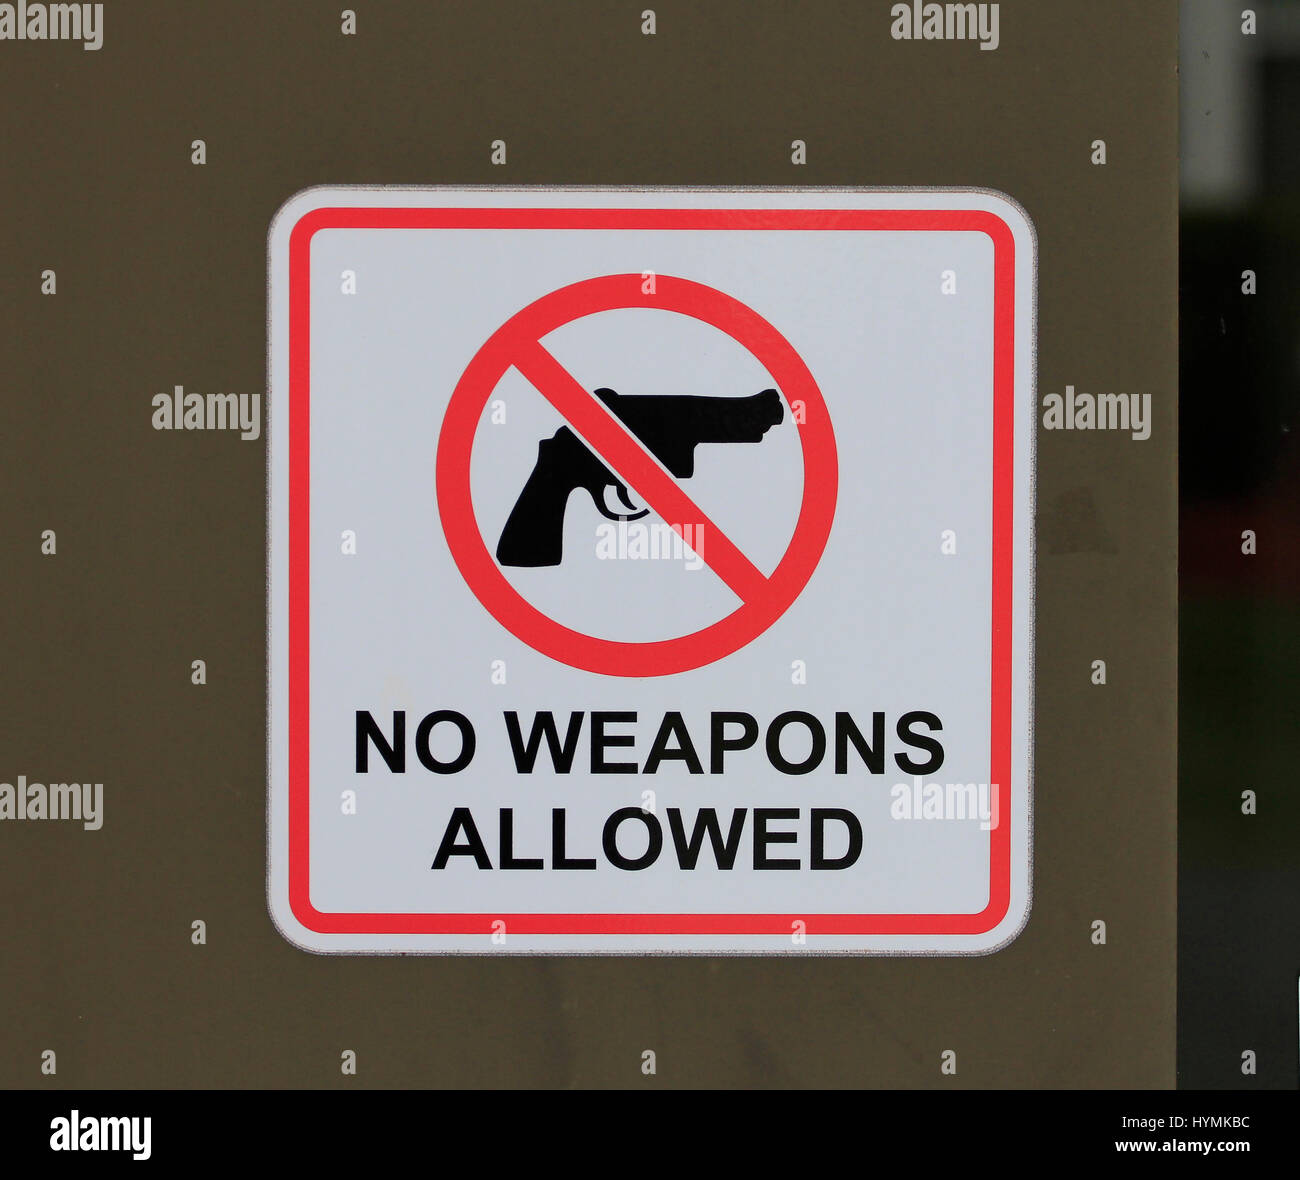 No weapons allowed sign on door Stock Photo